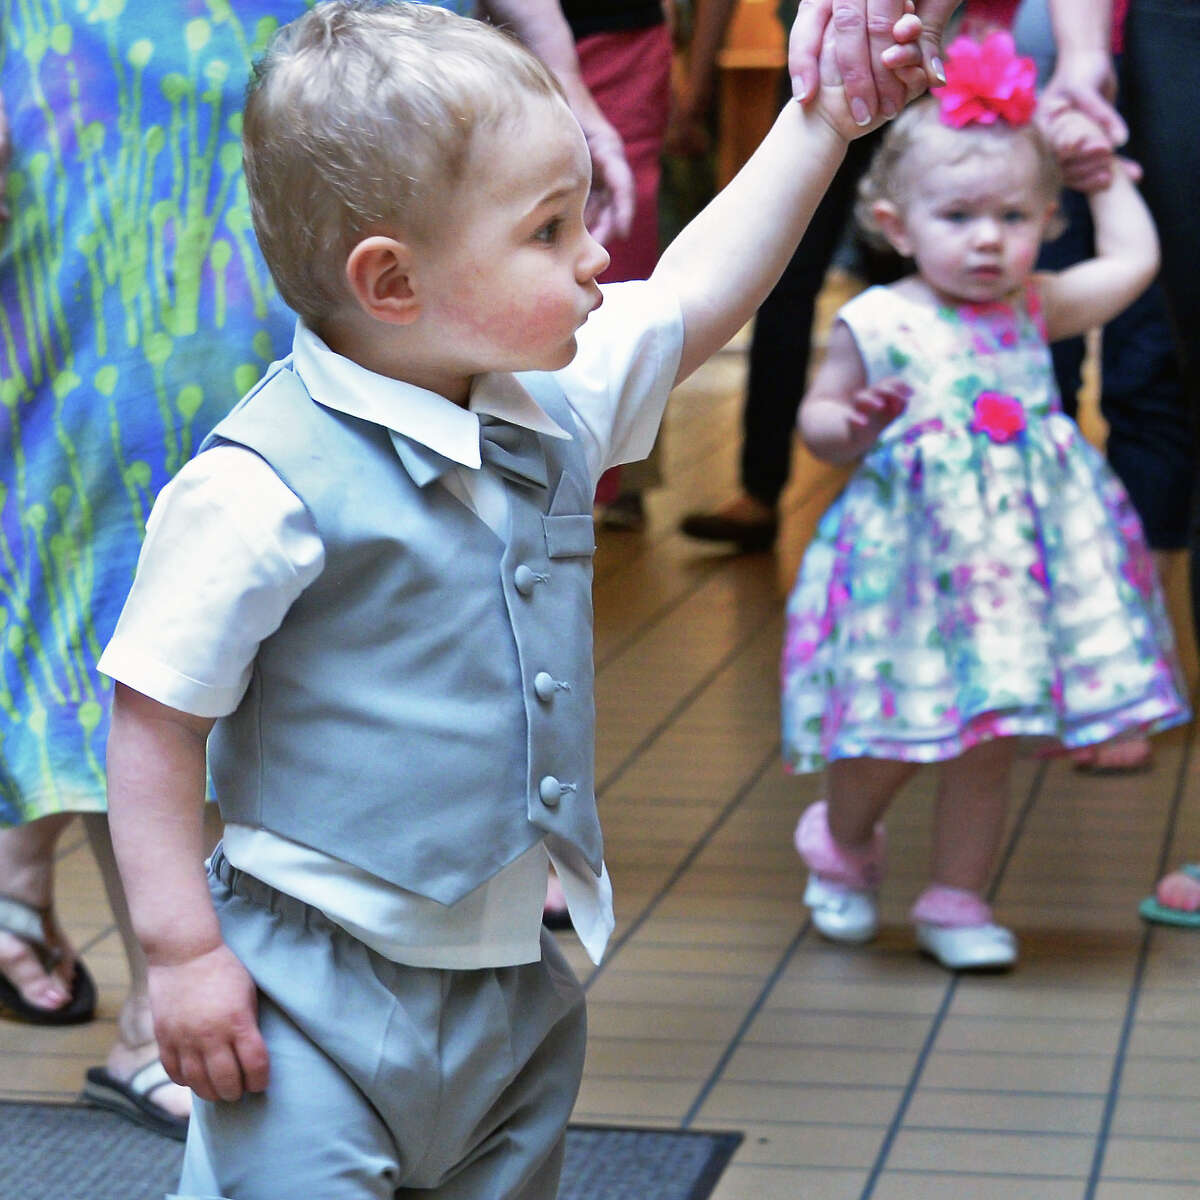 17-months-old Madison Lee V, of Wynantskill parades through the Bethlehem Public Library as it hosts a Preschool Prom at the library Thursday May 19, 2016 in Delmar, NY. (John Carl D'Annibale / Times Union)